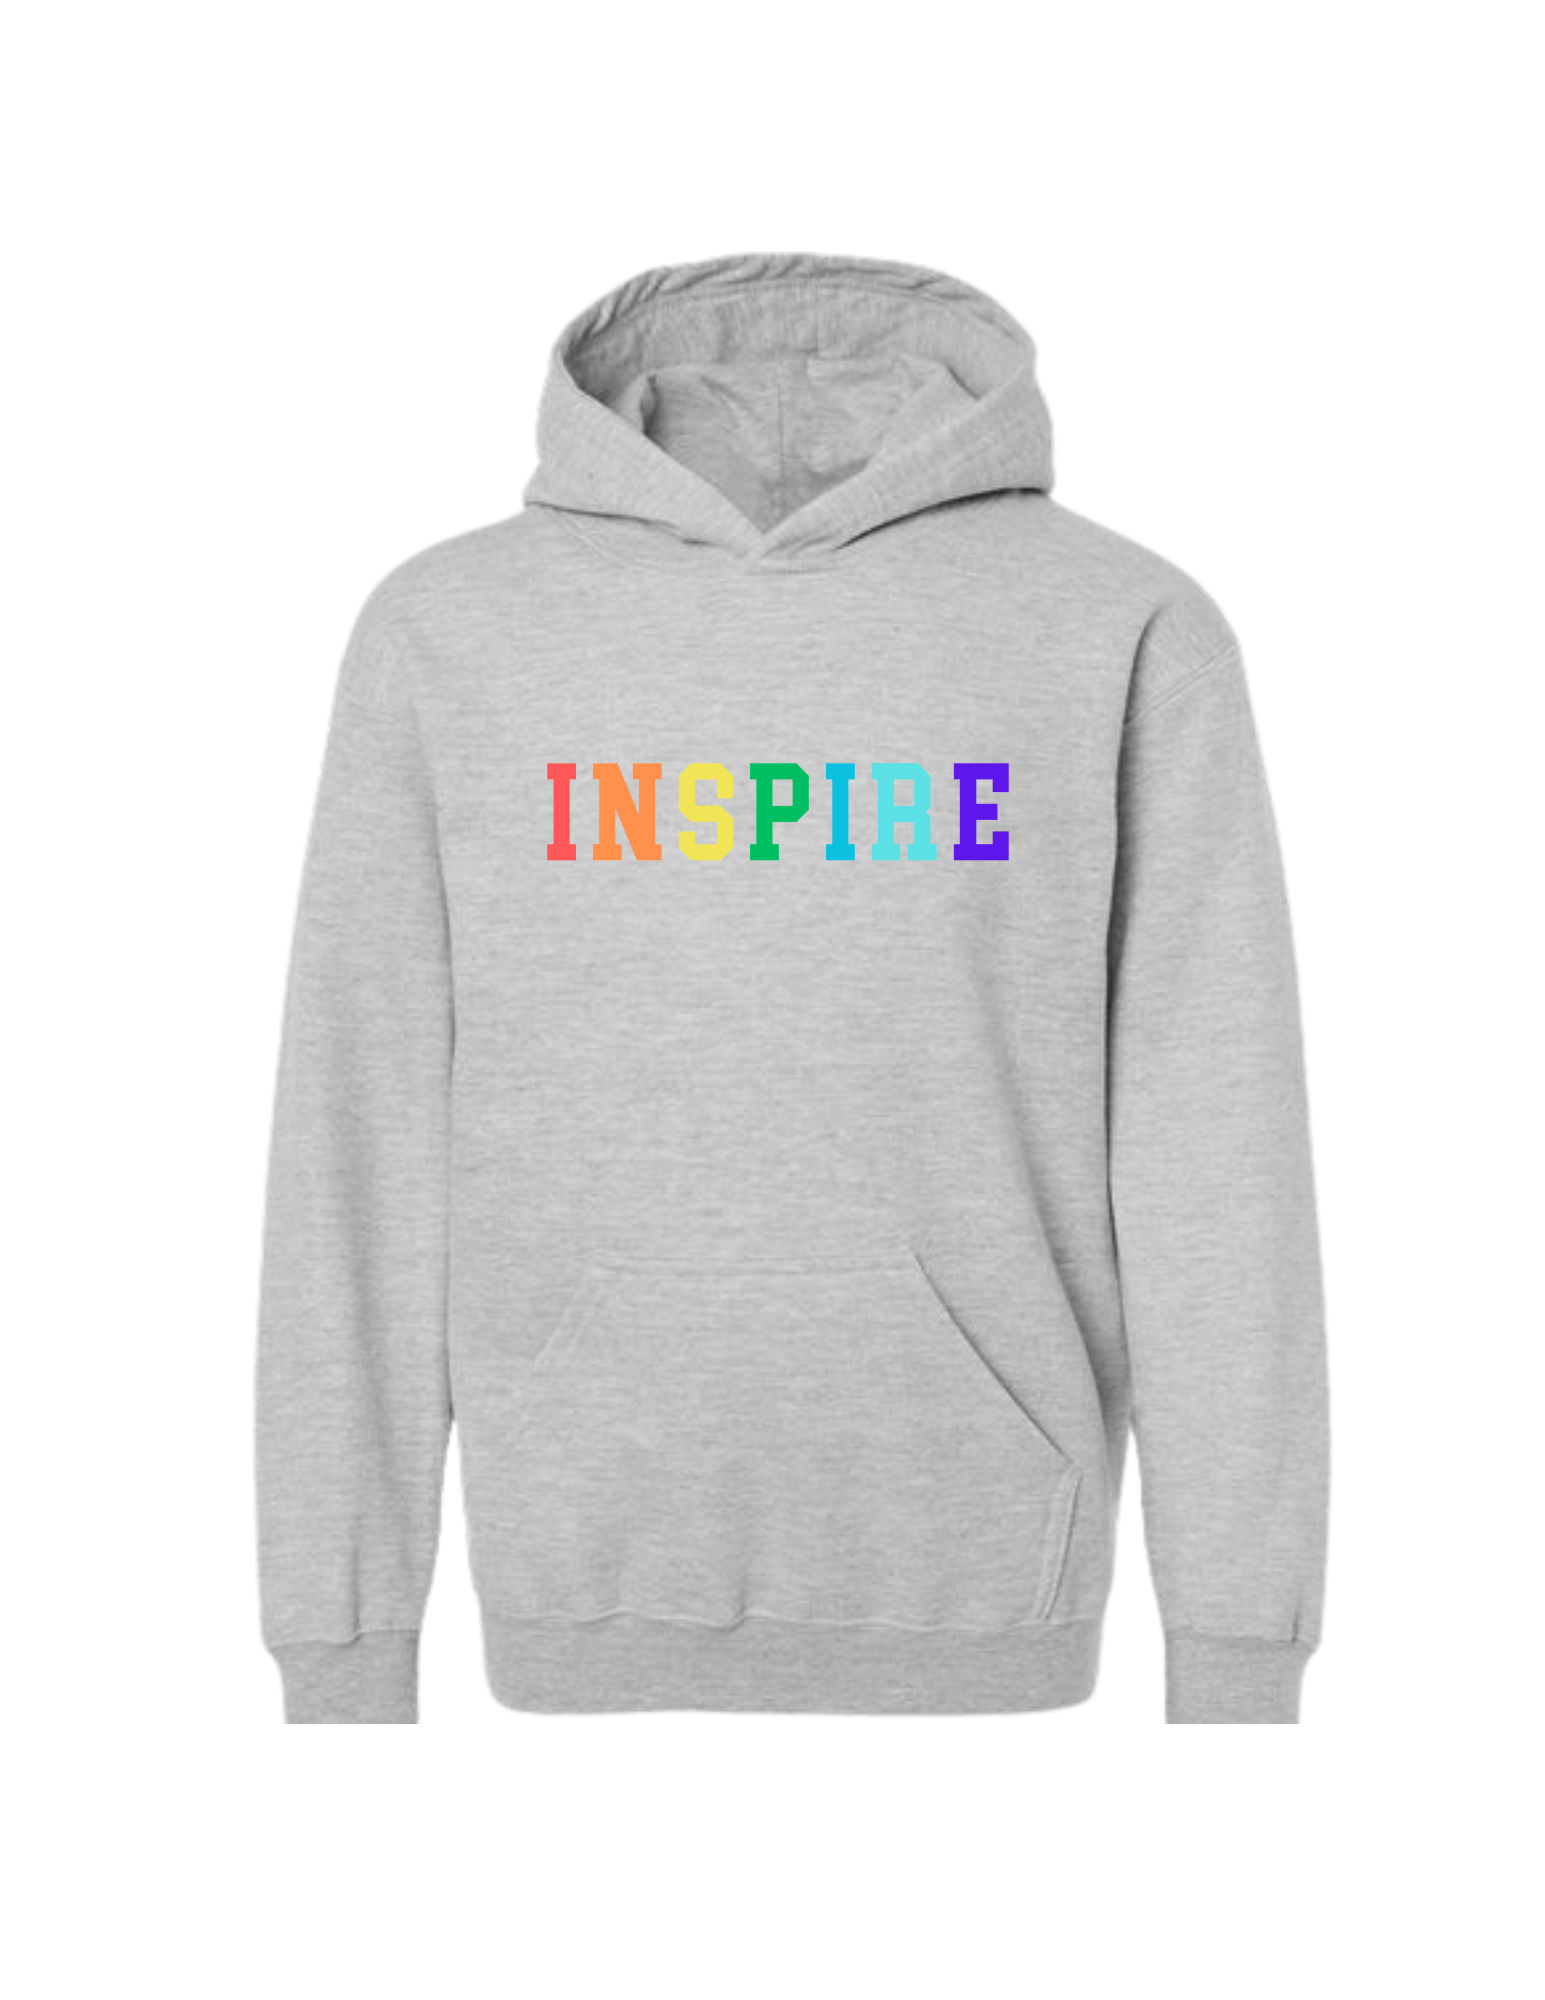 Inspire Colorful Gray Hoodie - Youth + Adult - Aspen Lane 